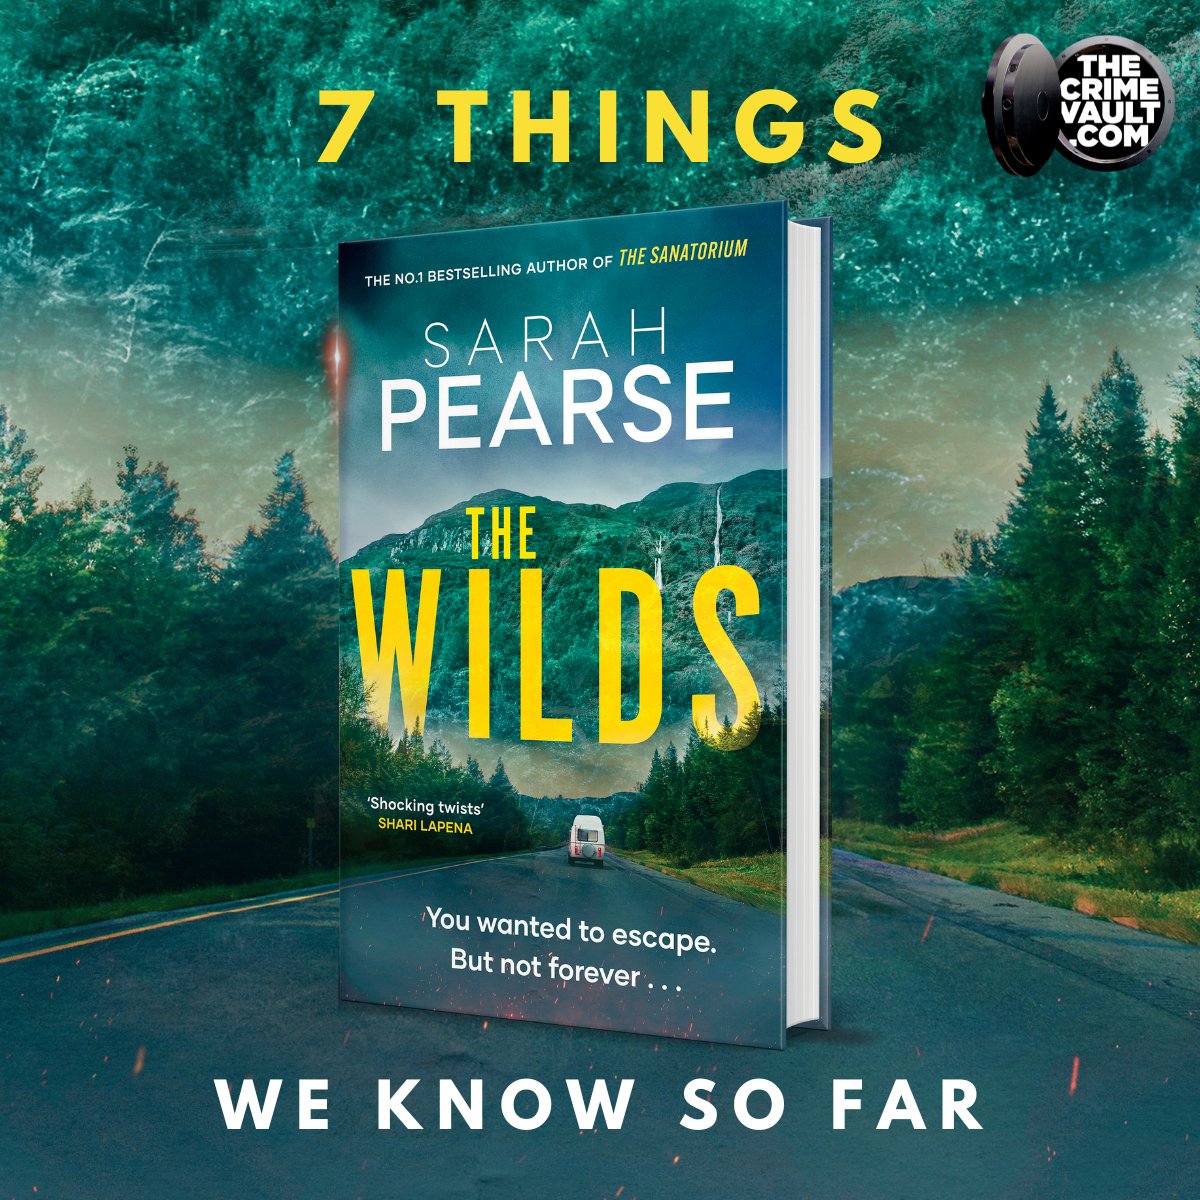 Are you ready for #TheWilds? This July, @SarahVPearse returns with a thrilling and twisty new mystery set in a remote national park. Discover what else we know so far 🔎 brnw.ch/21wI2Li